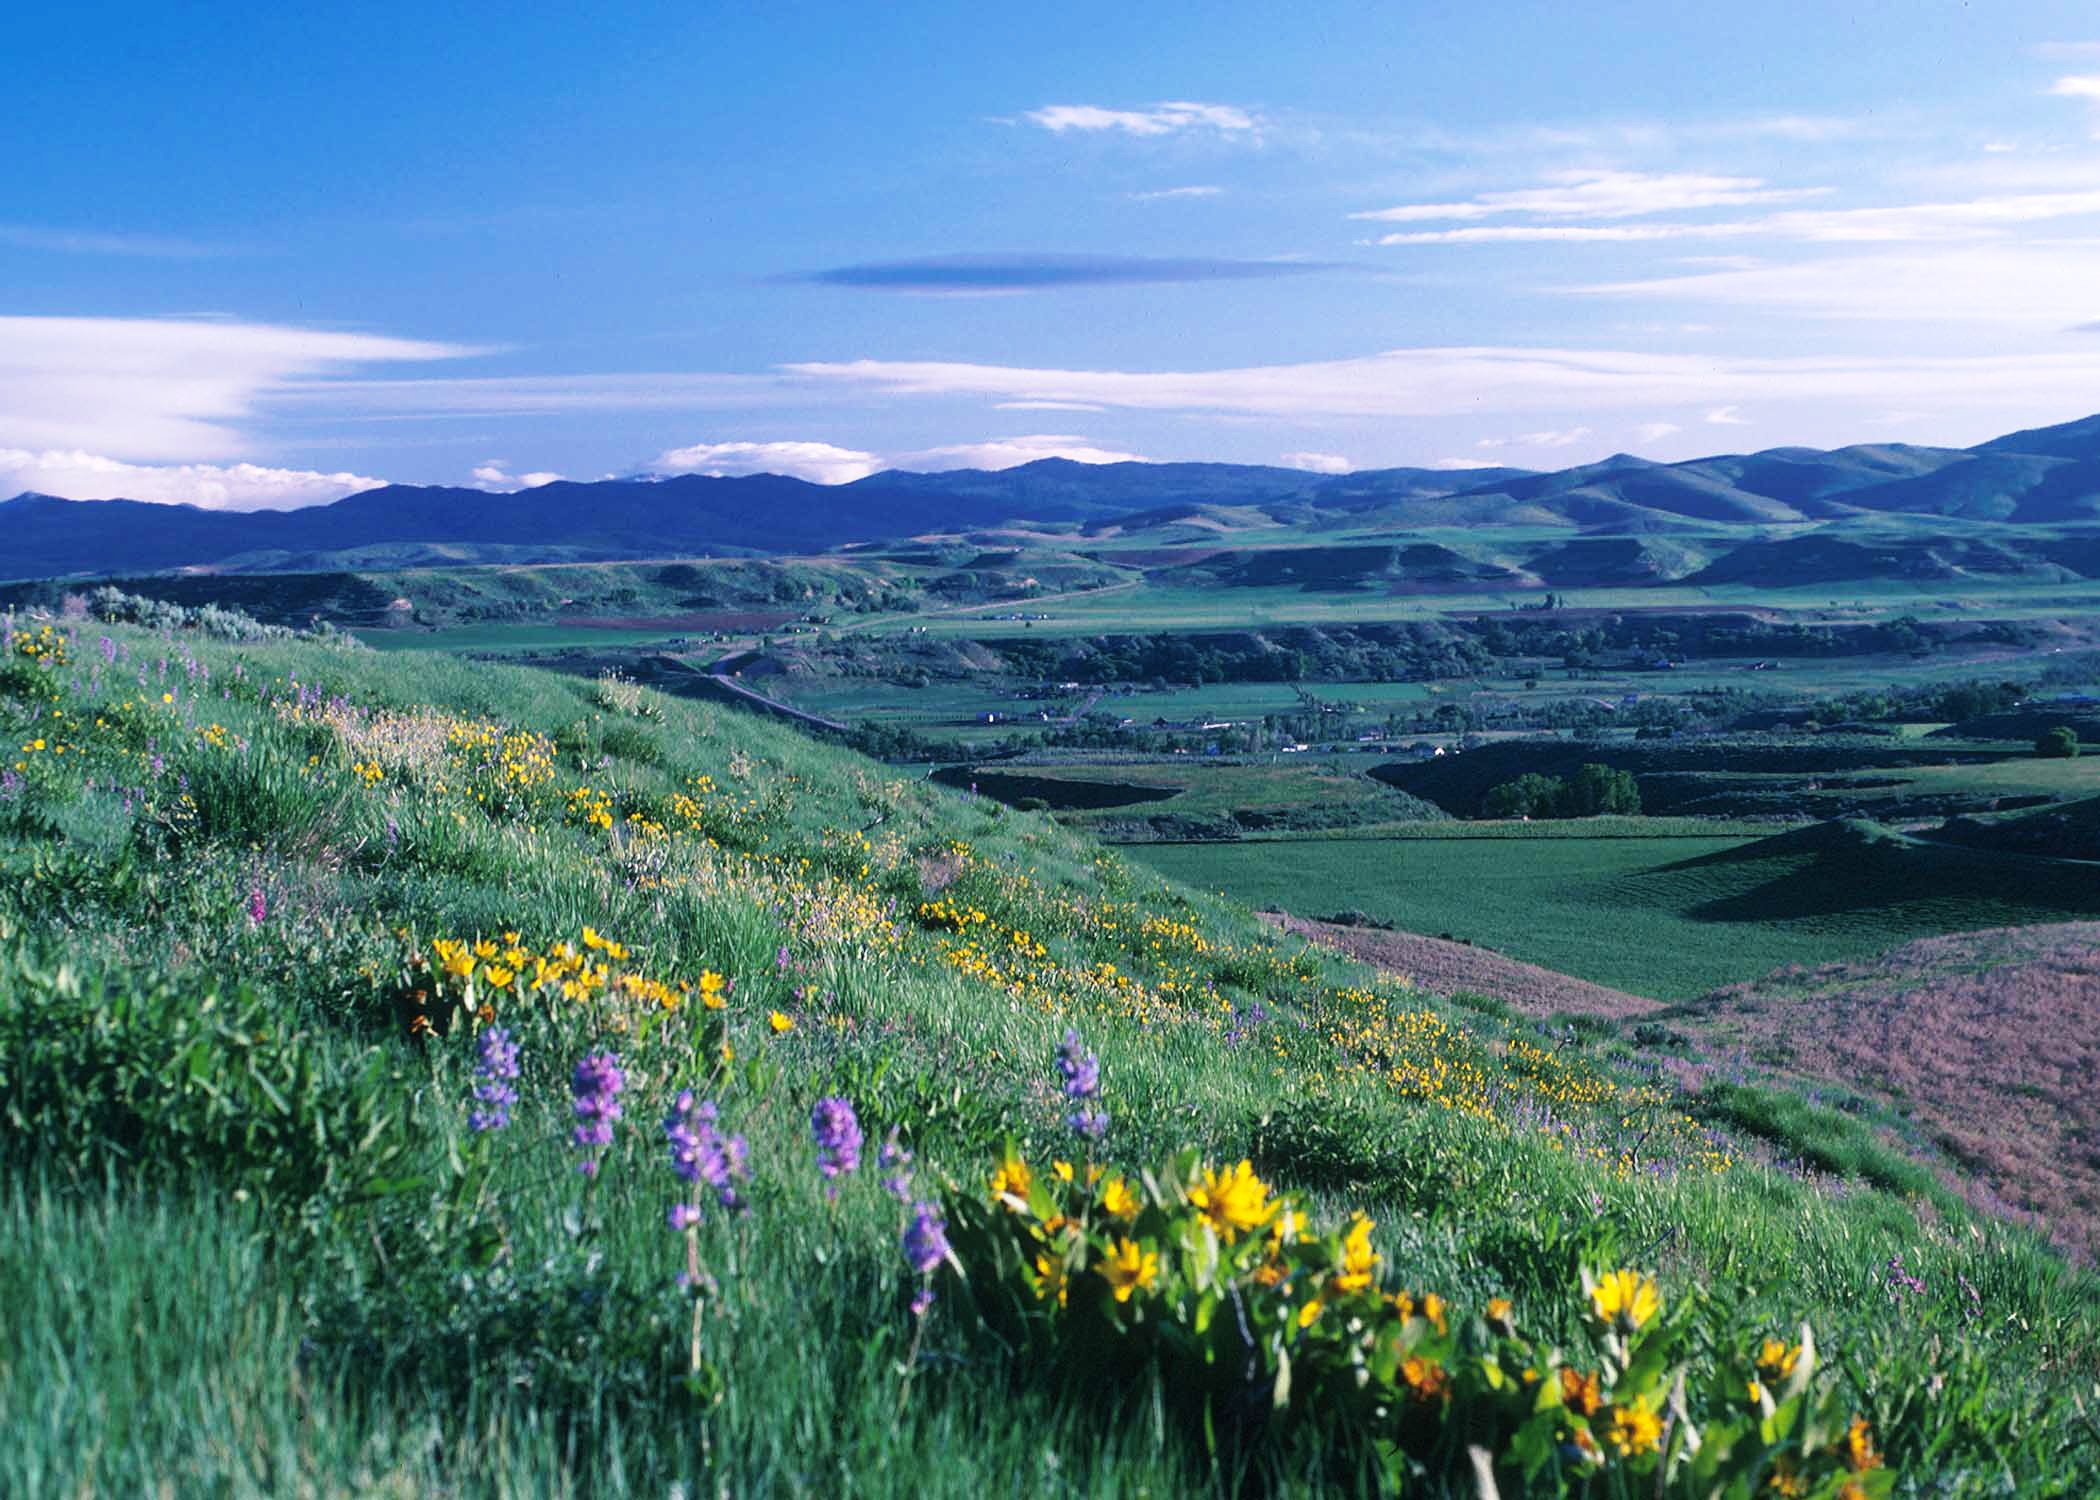 Beautiful image of mountains in background and wildflowers in foreground